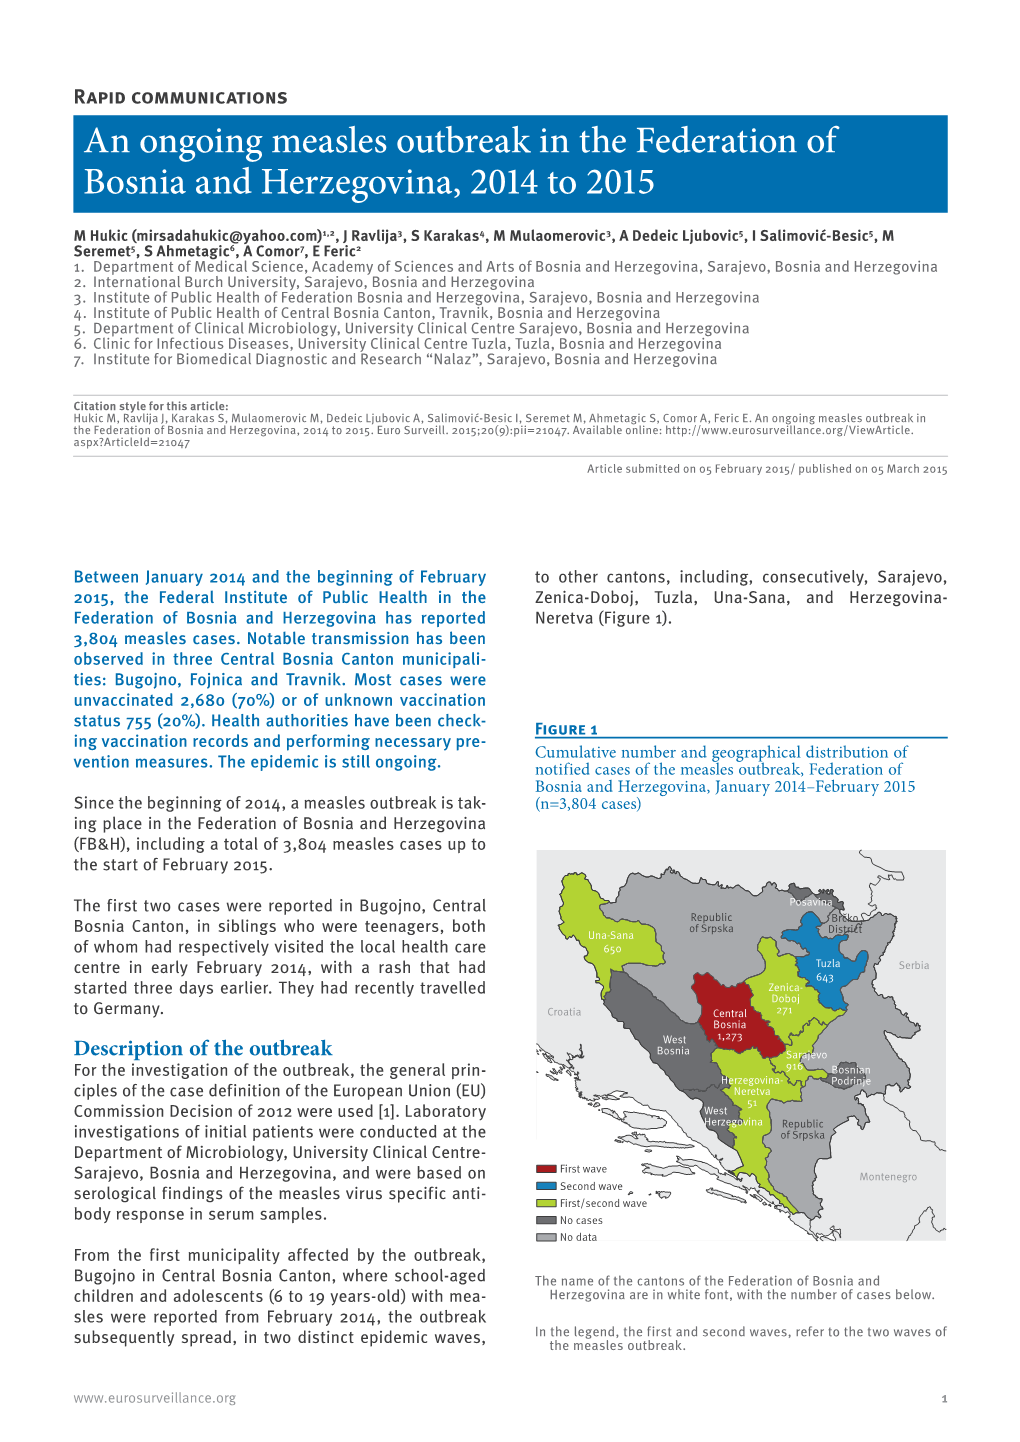 An Ongoing Measles Outbreak in the Federation of Bosnia and Herzegovina, 2014 to 2015